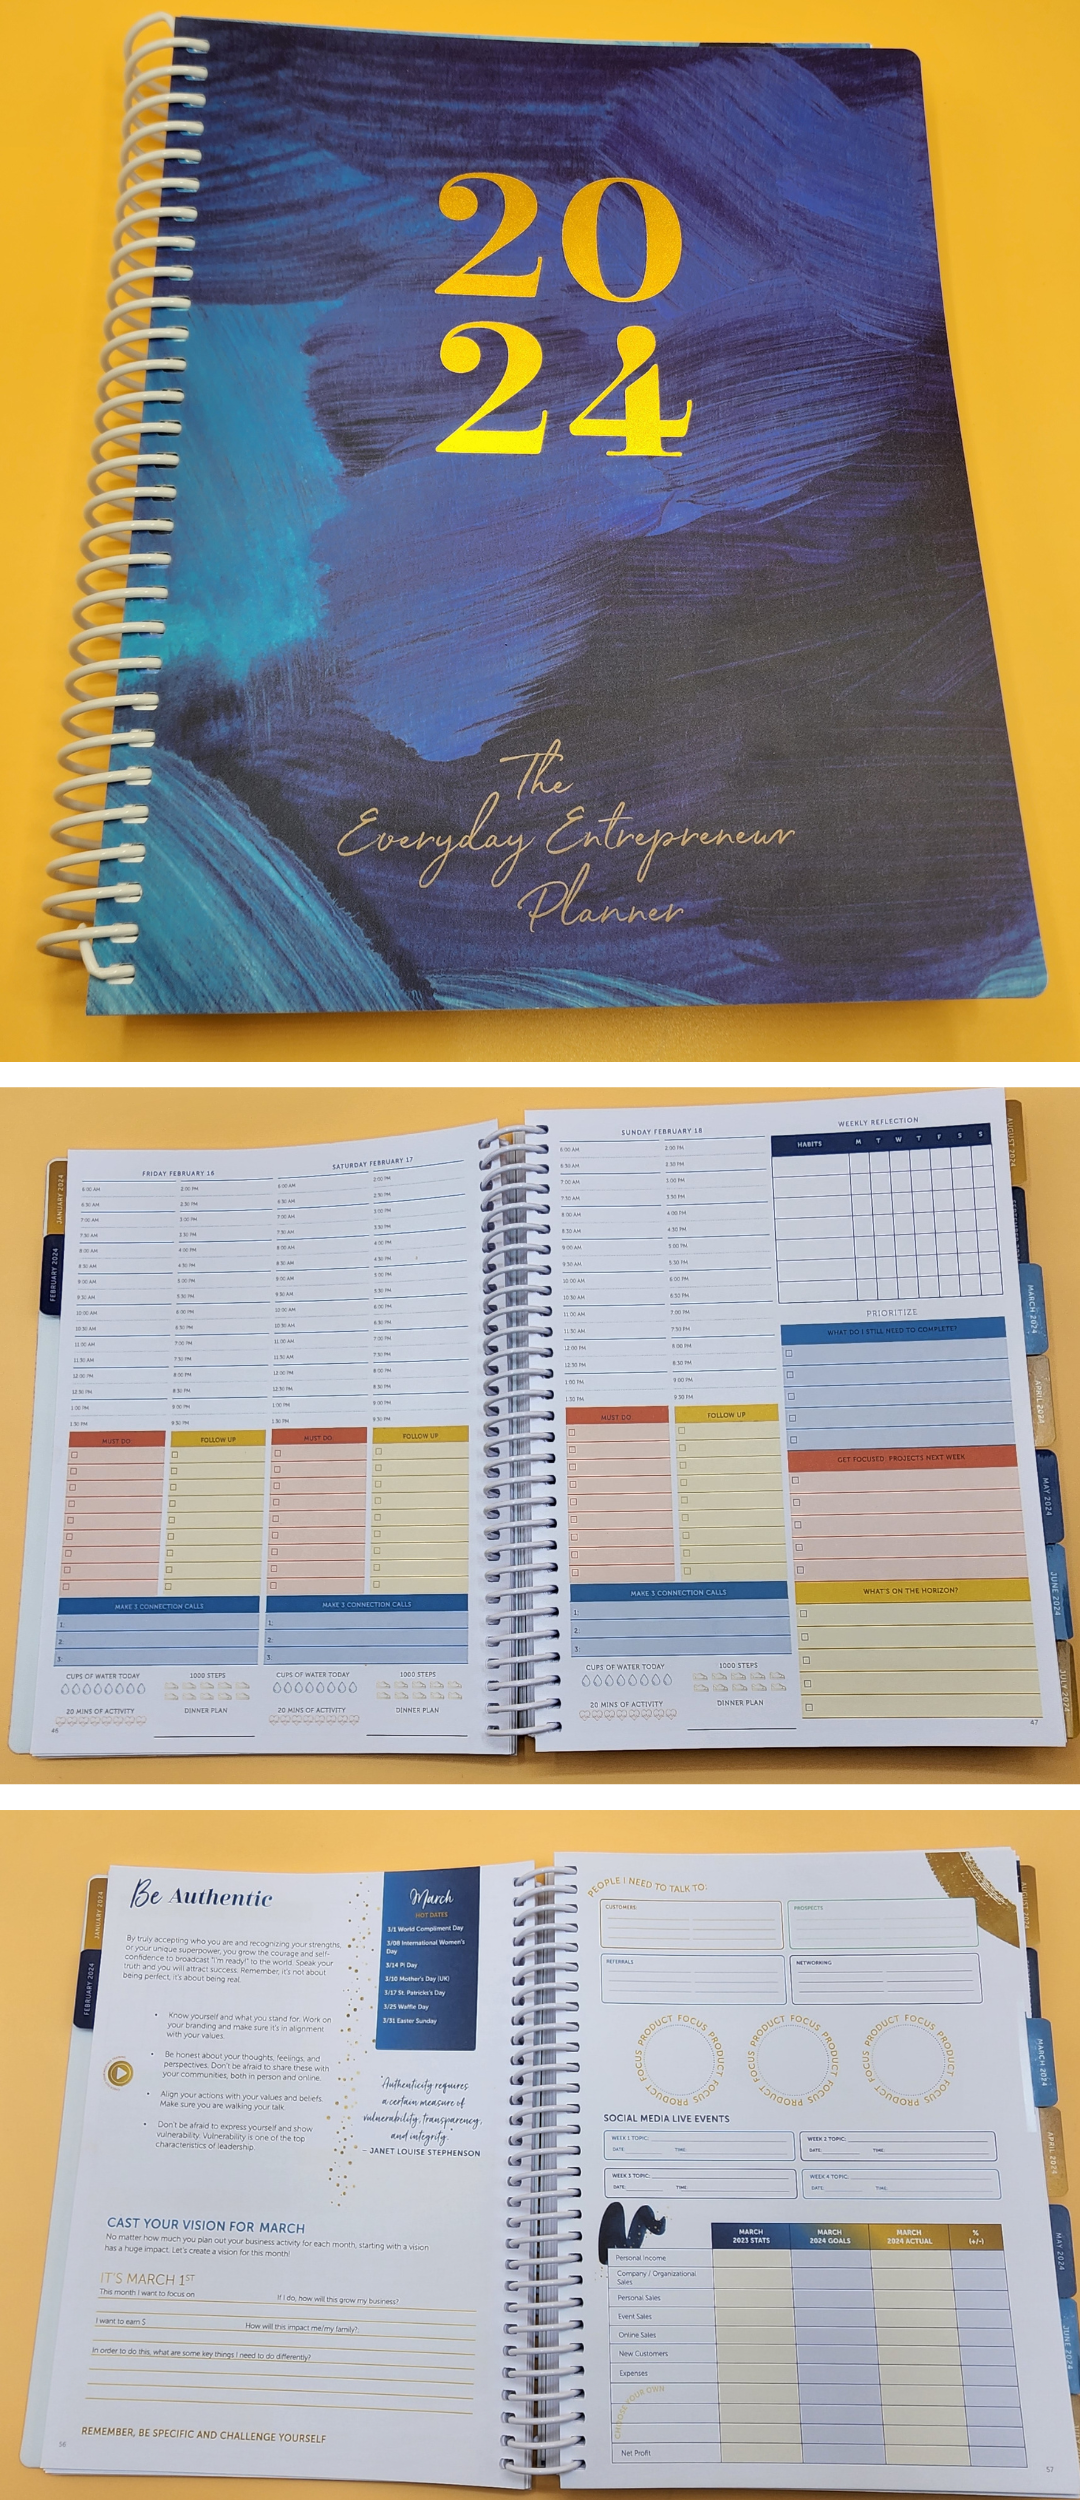 The Everyday Entrepreneur Planner - Bundle of two (Buy one get one free deal)